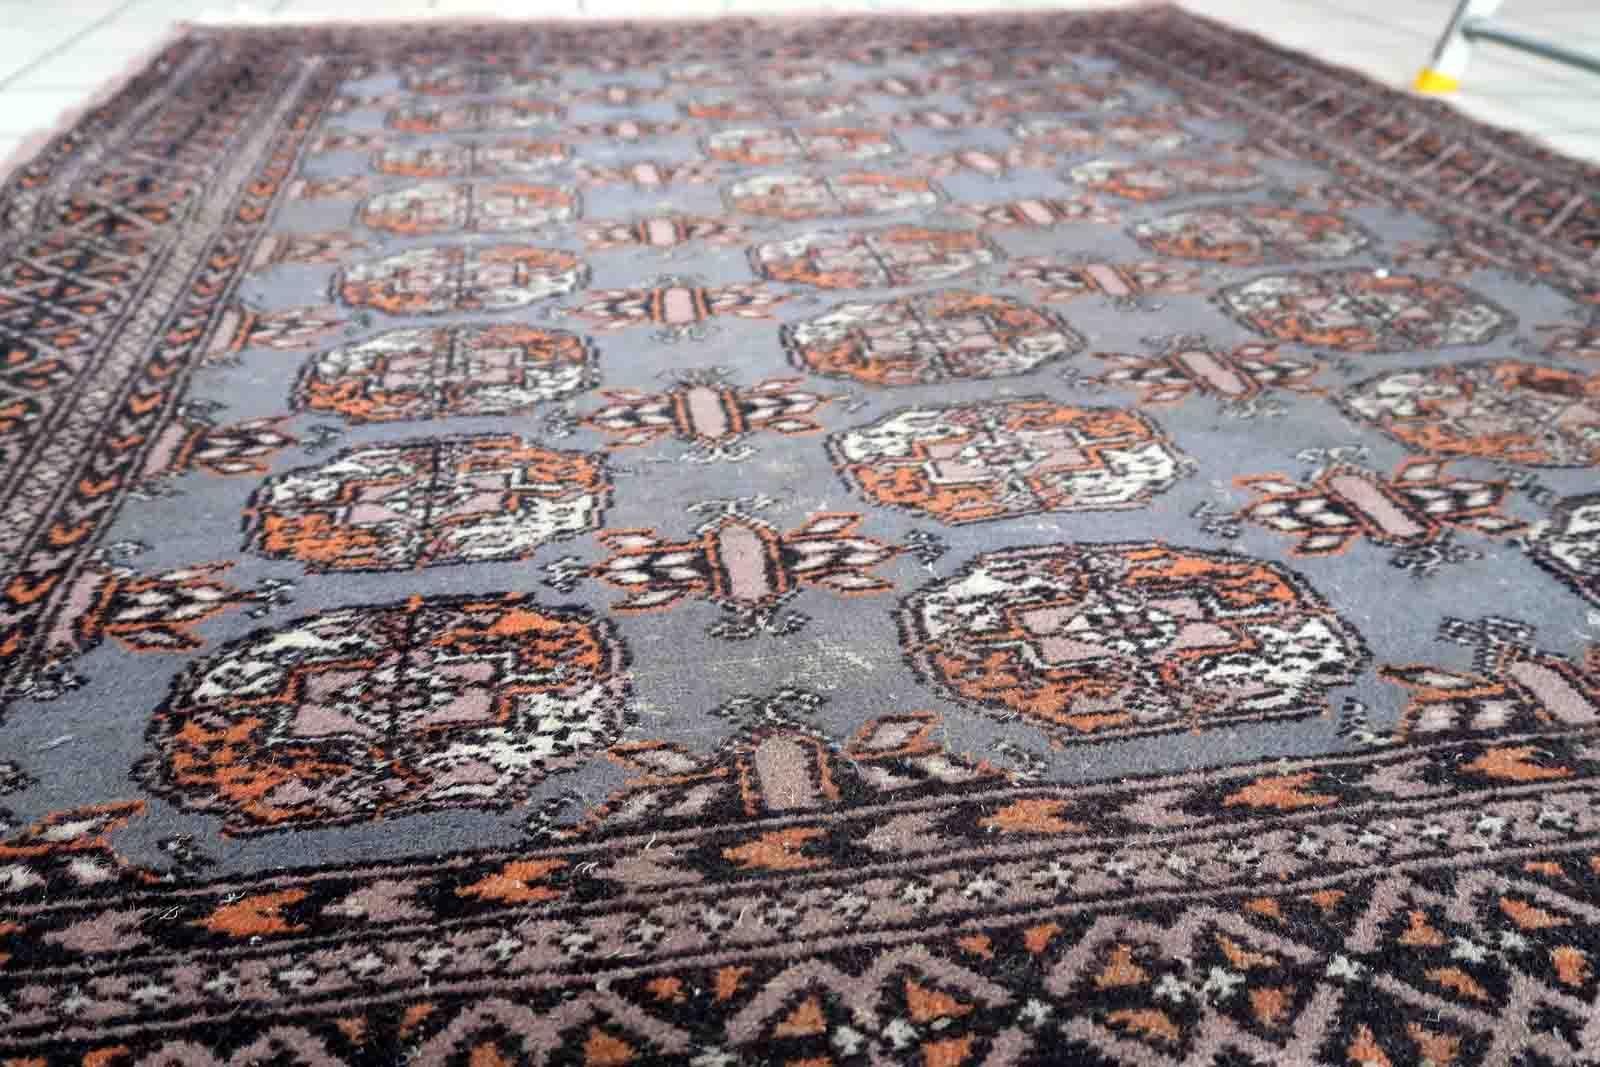 Handmade vintage Uzbek Bukhara rug in traditional design. The rug is from the end of 20th century made in wool. The rug is in original condition, has some low pile.

-condition: original, some low pile,

-circa: 1960s,

-size: 4.1' x 6.2' (127cm x